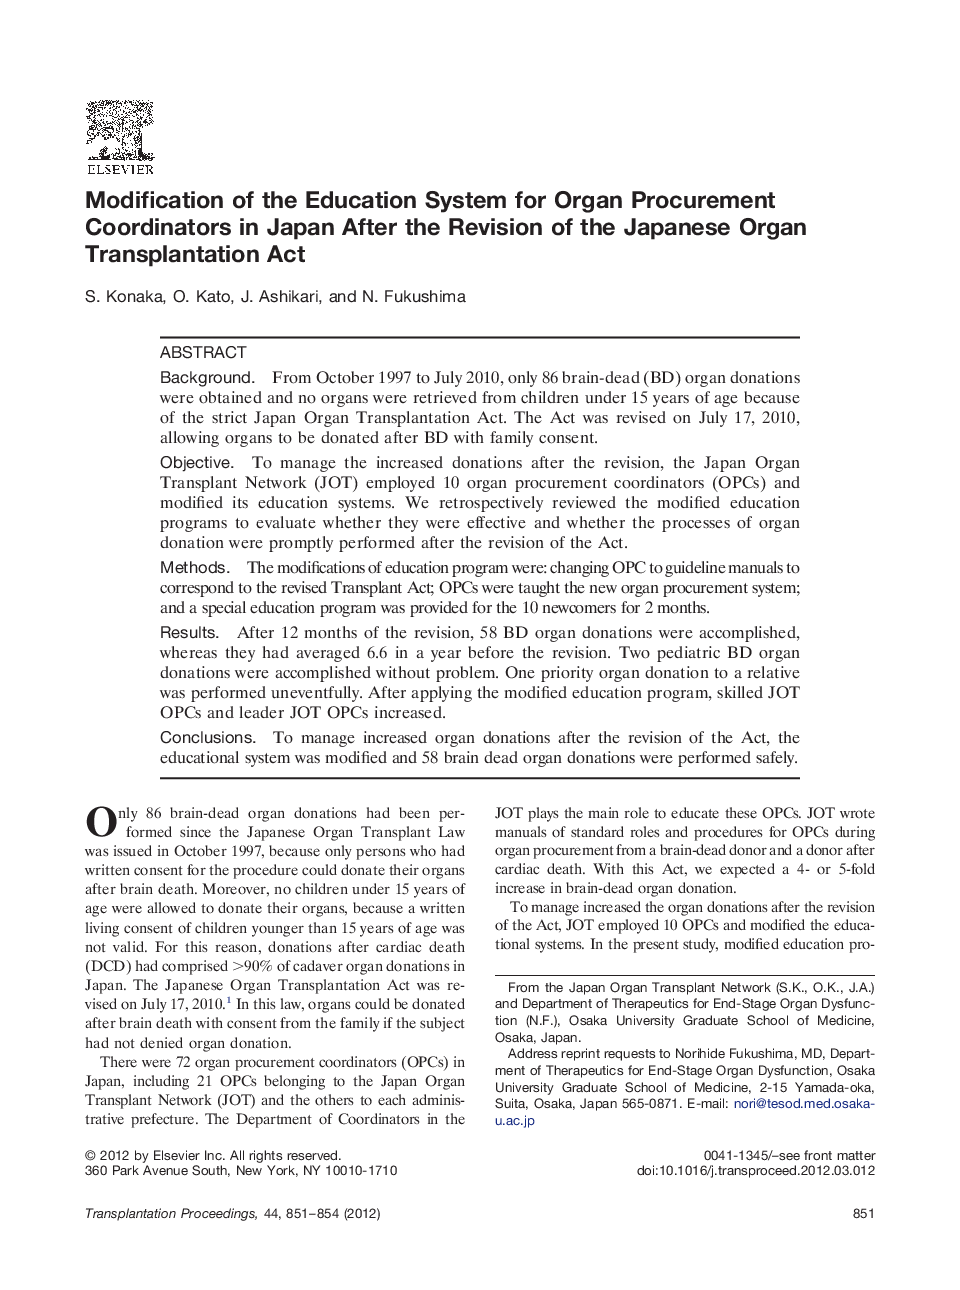 Modification of the Education System for Organ Procurement Coordinators in Japan After the Revision of the Japanese Organ Transplantation Act